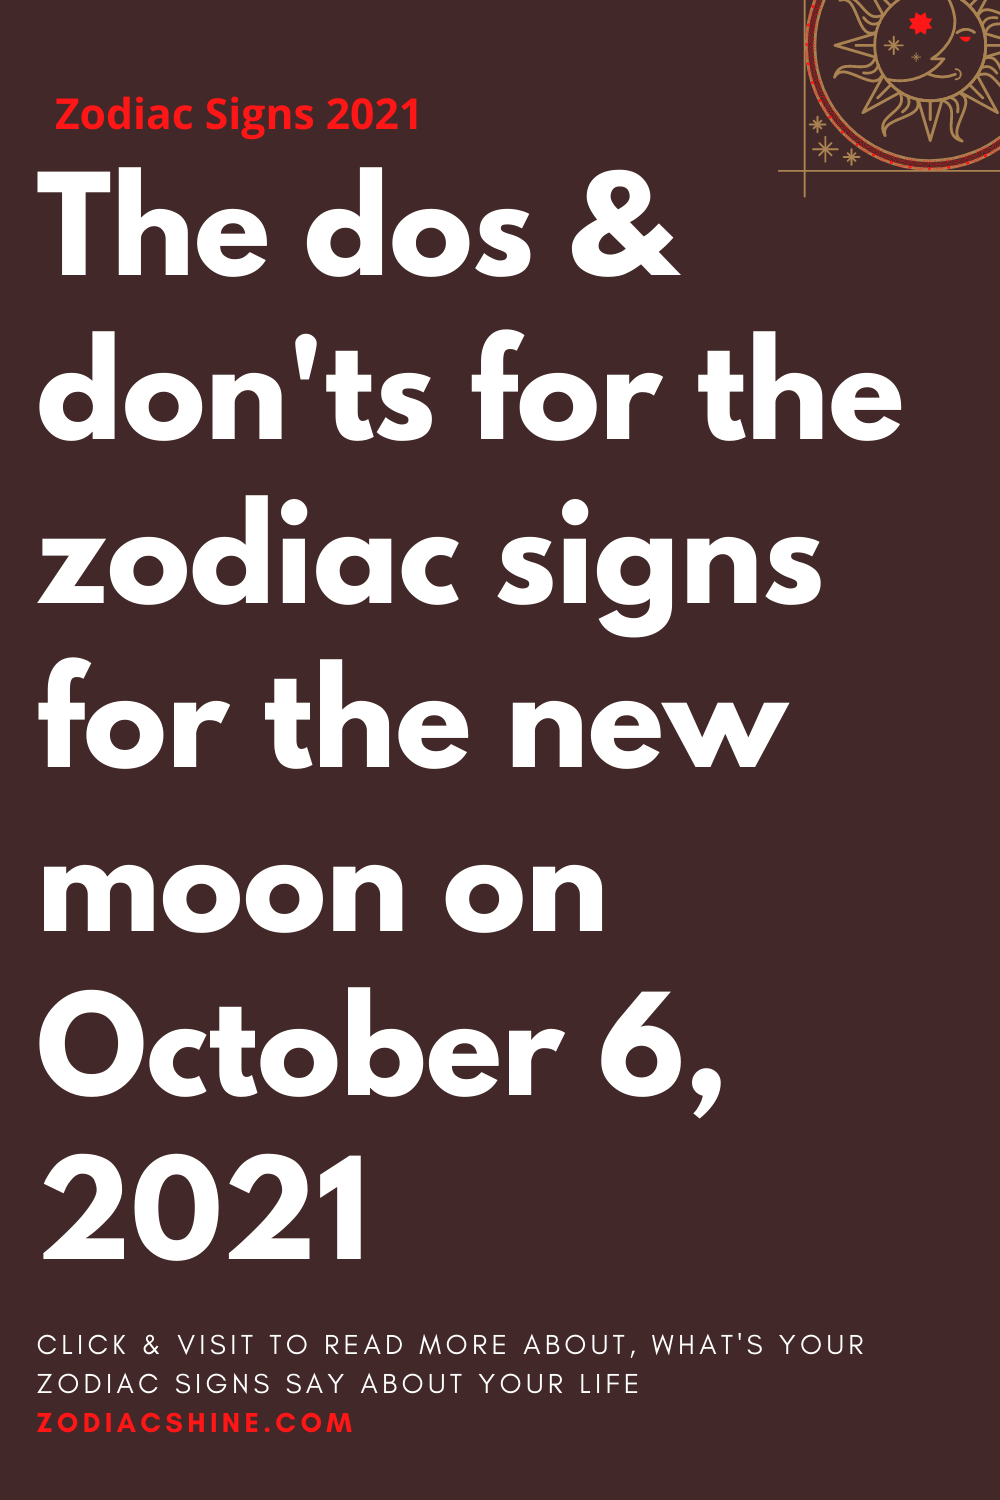 The dos & don'ts for the zodiac signs for the new moon on October 6, 2021